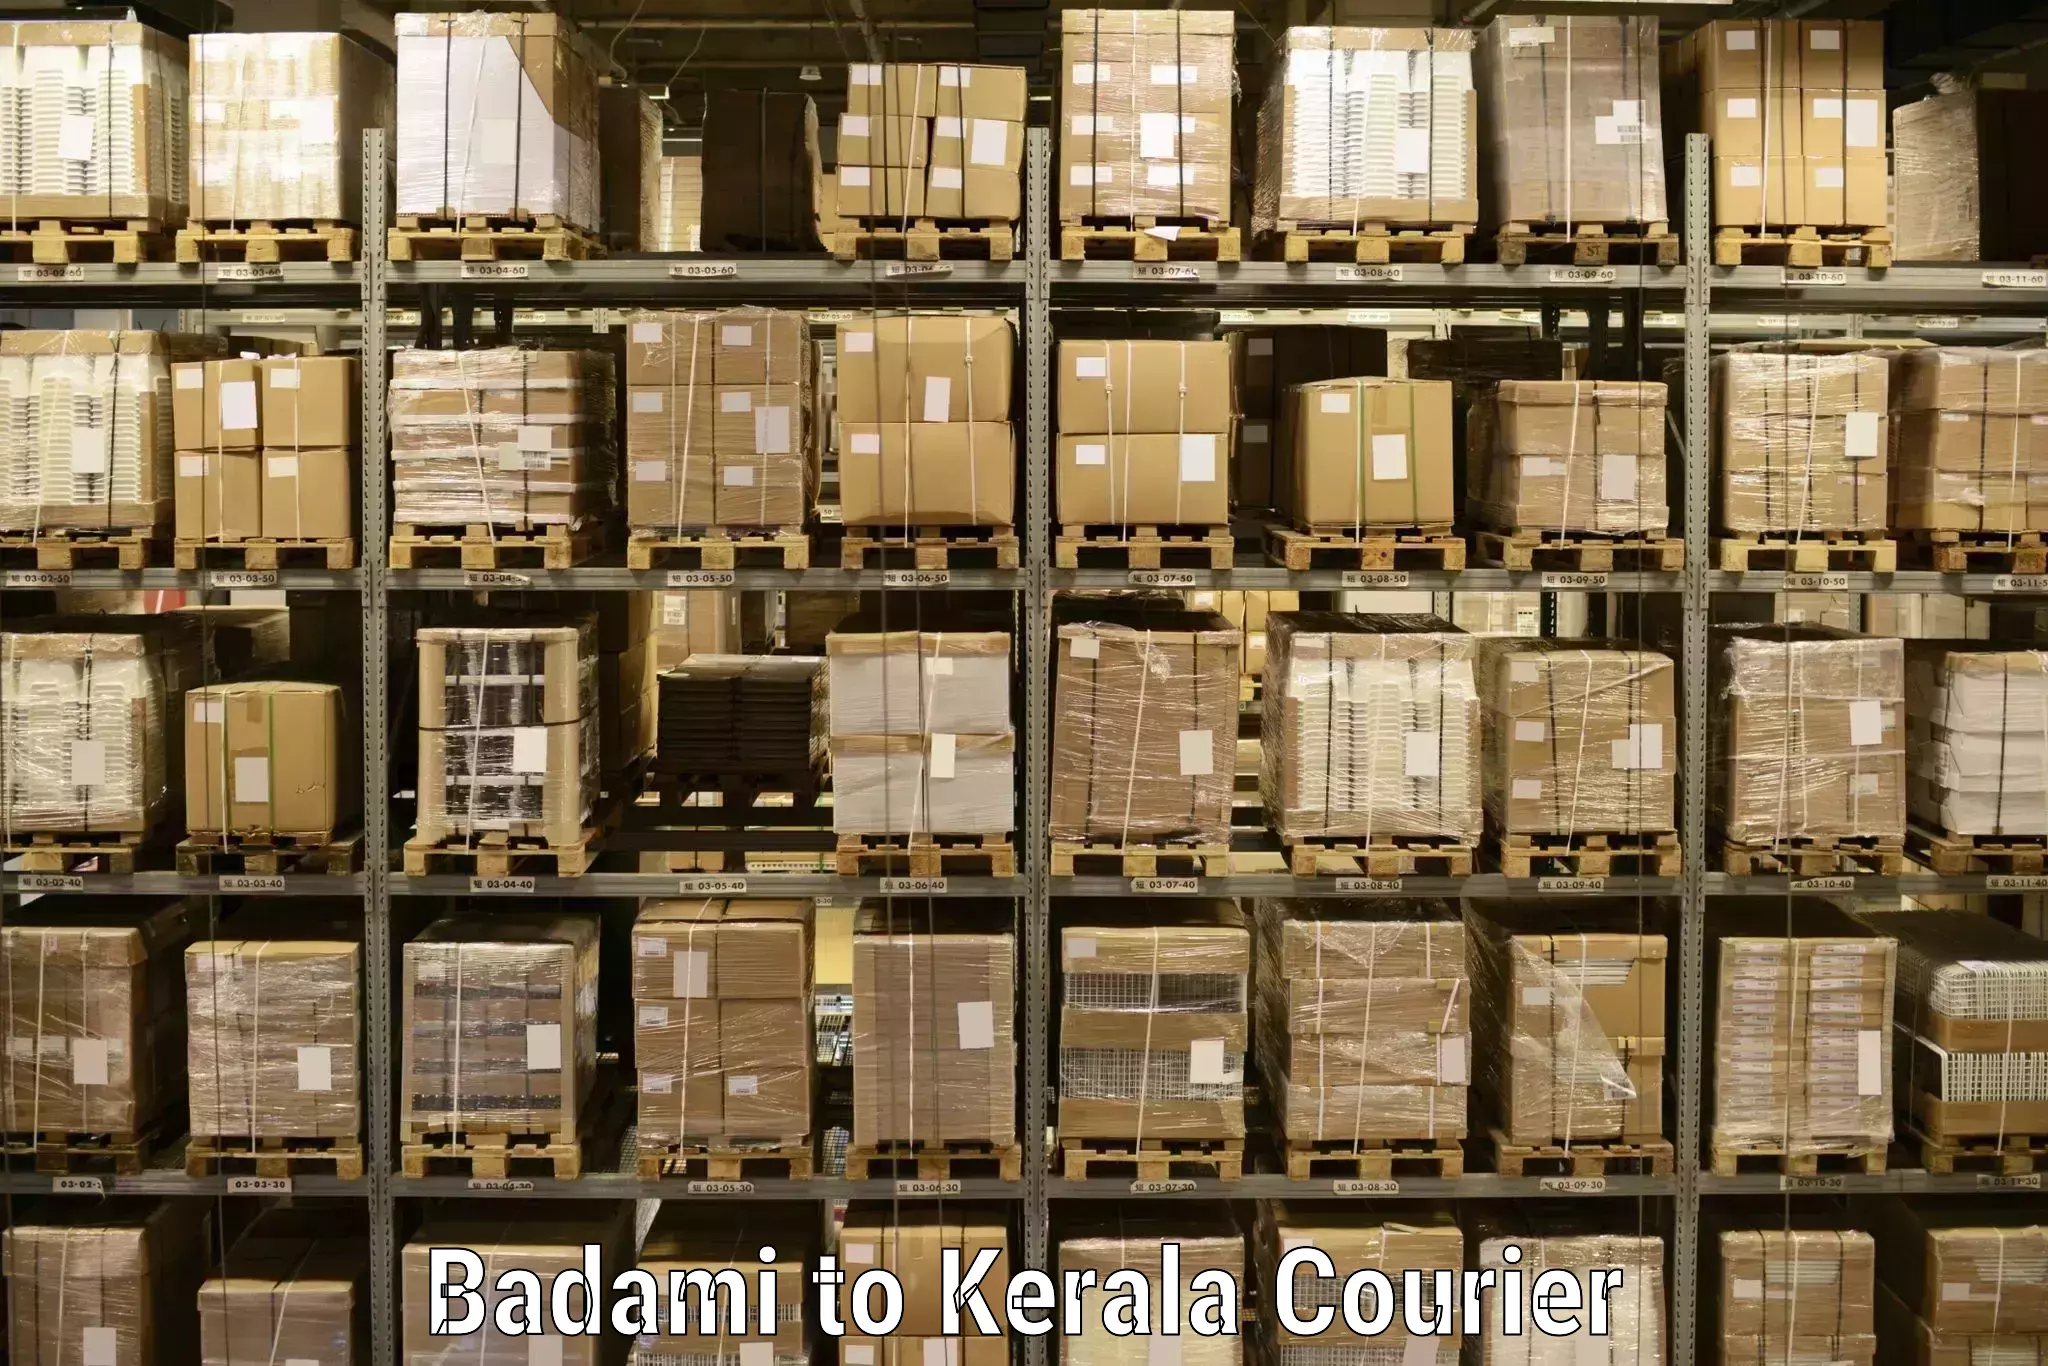 Quality courier services in Badami to Kakkayam